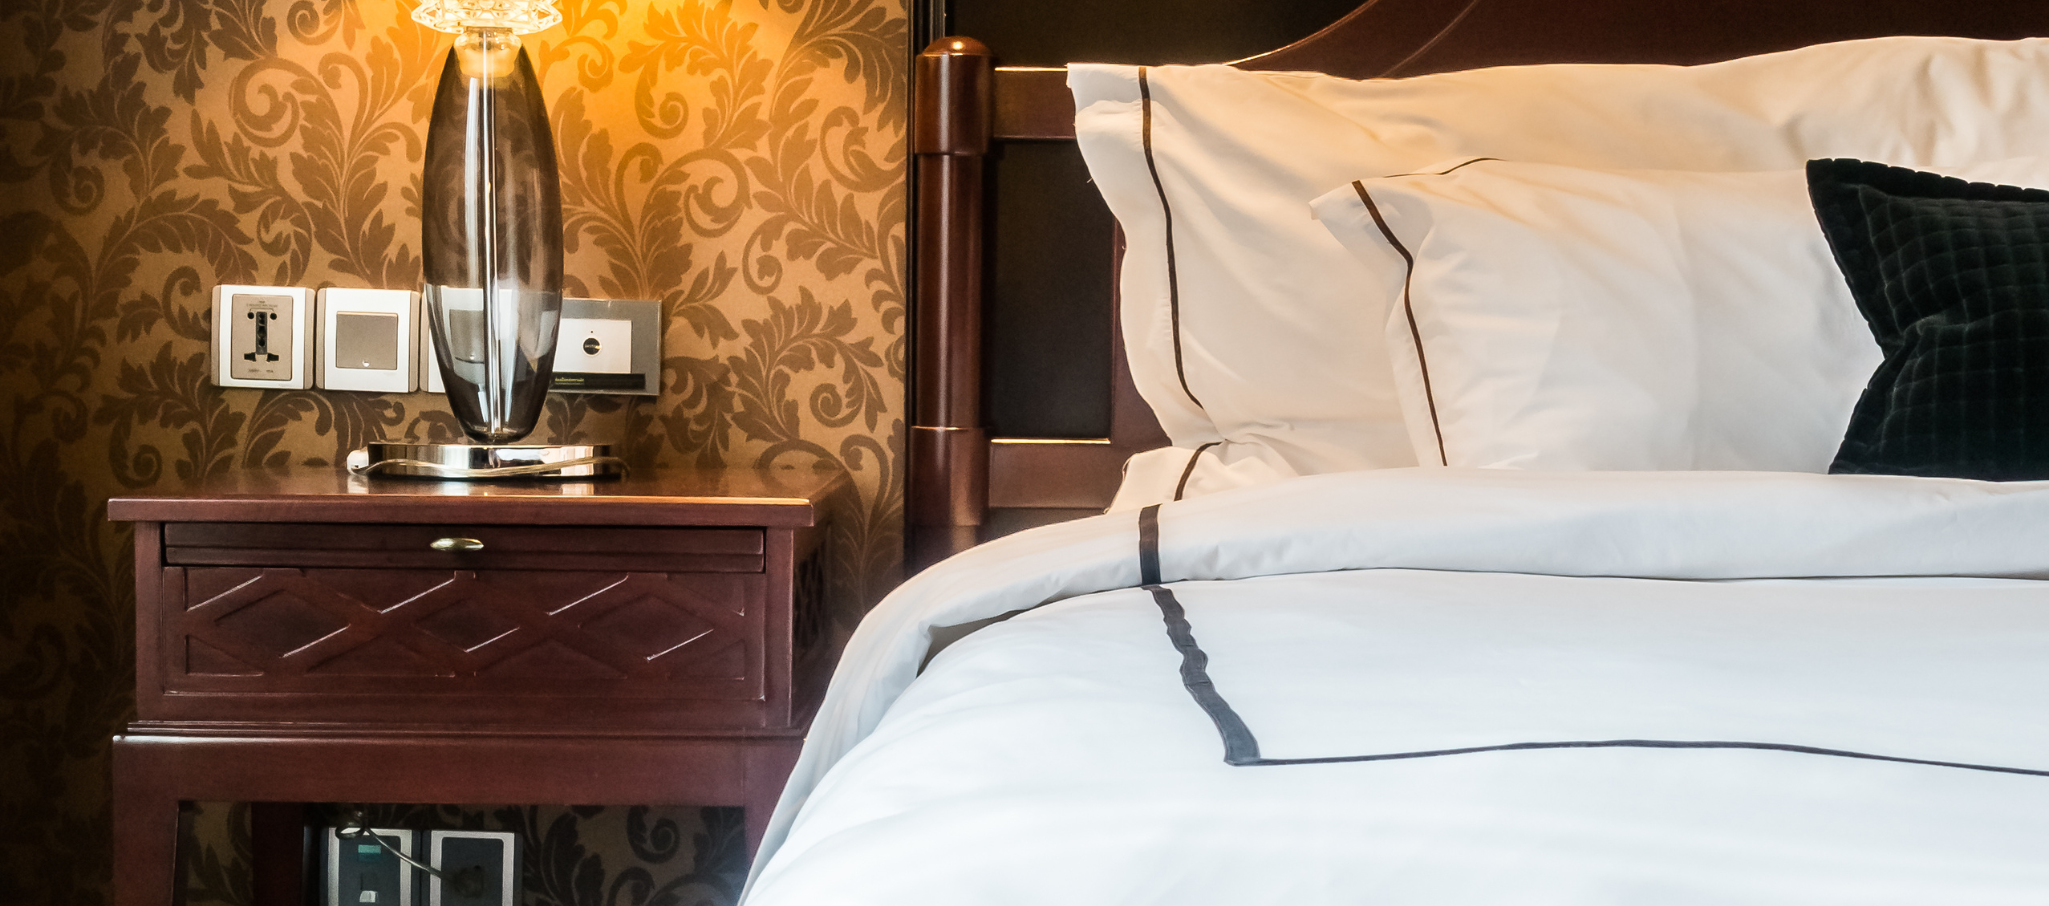 Why are French bedding brands the preferred choice for luxury hotels?